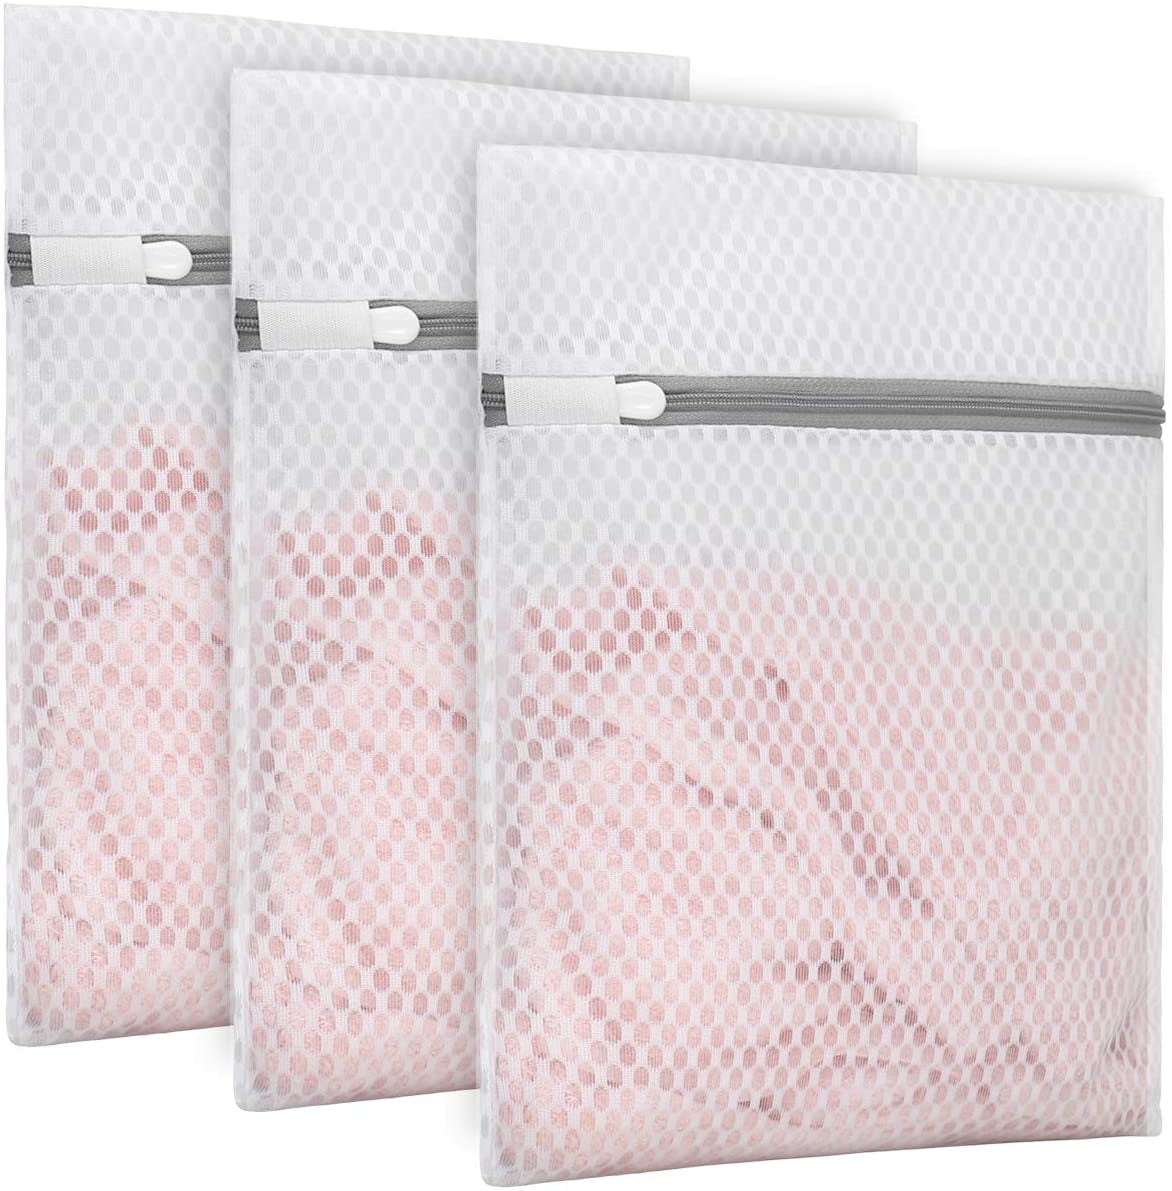 WashGuard -USA- Mesh Laundry Bags for Delicates, Lingerie and Bra Washing  Bags, Essential for Clothes Protection in Washing Machine - Medium 2 Pack 